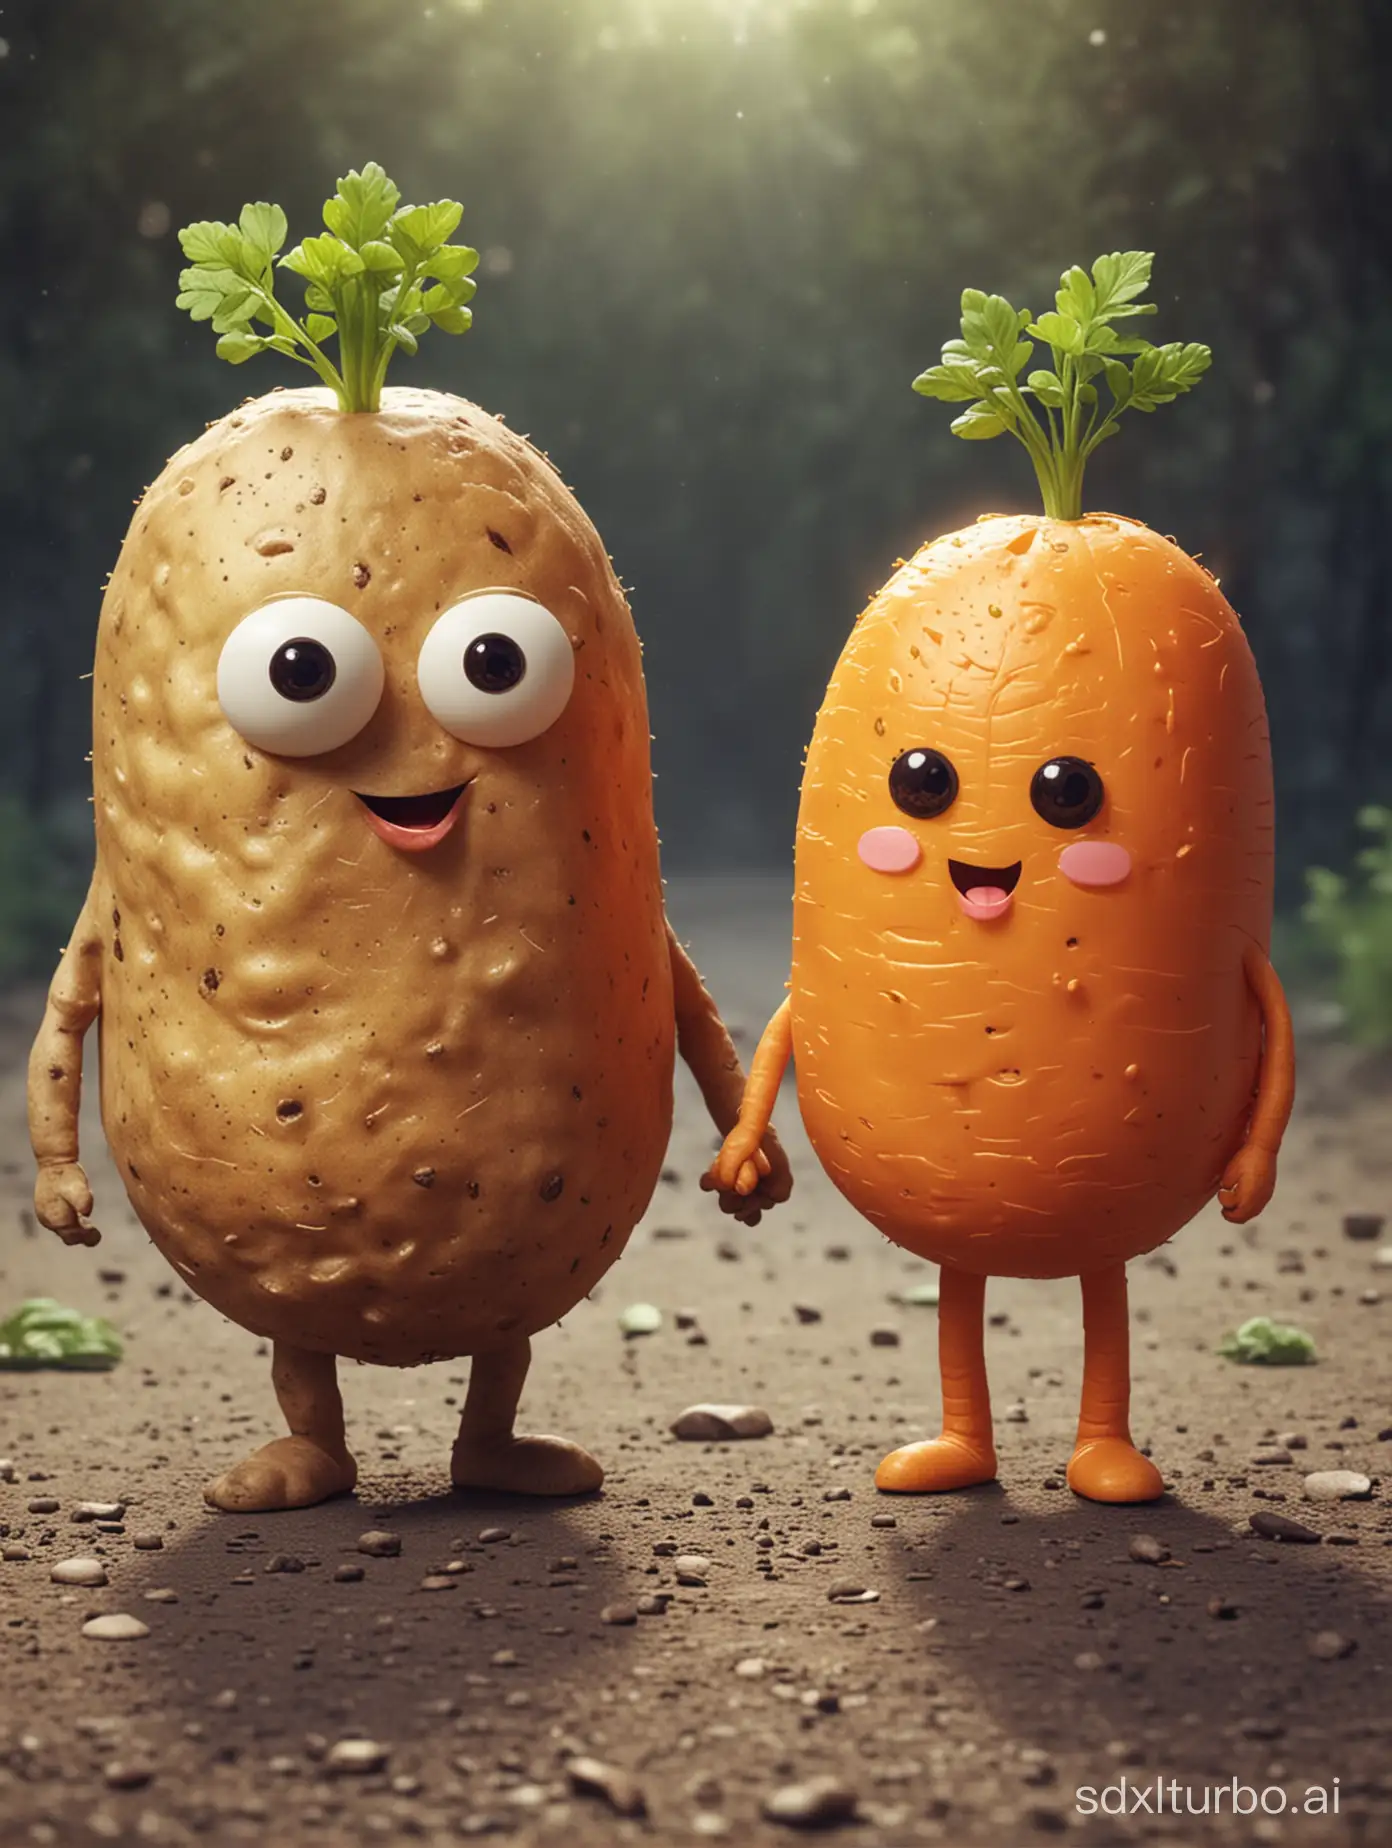 Potato Man and Carrot-chan's Date